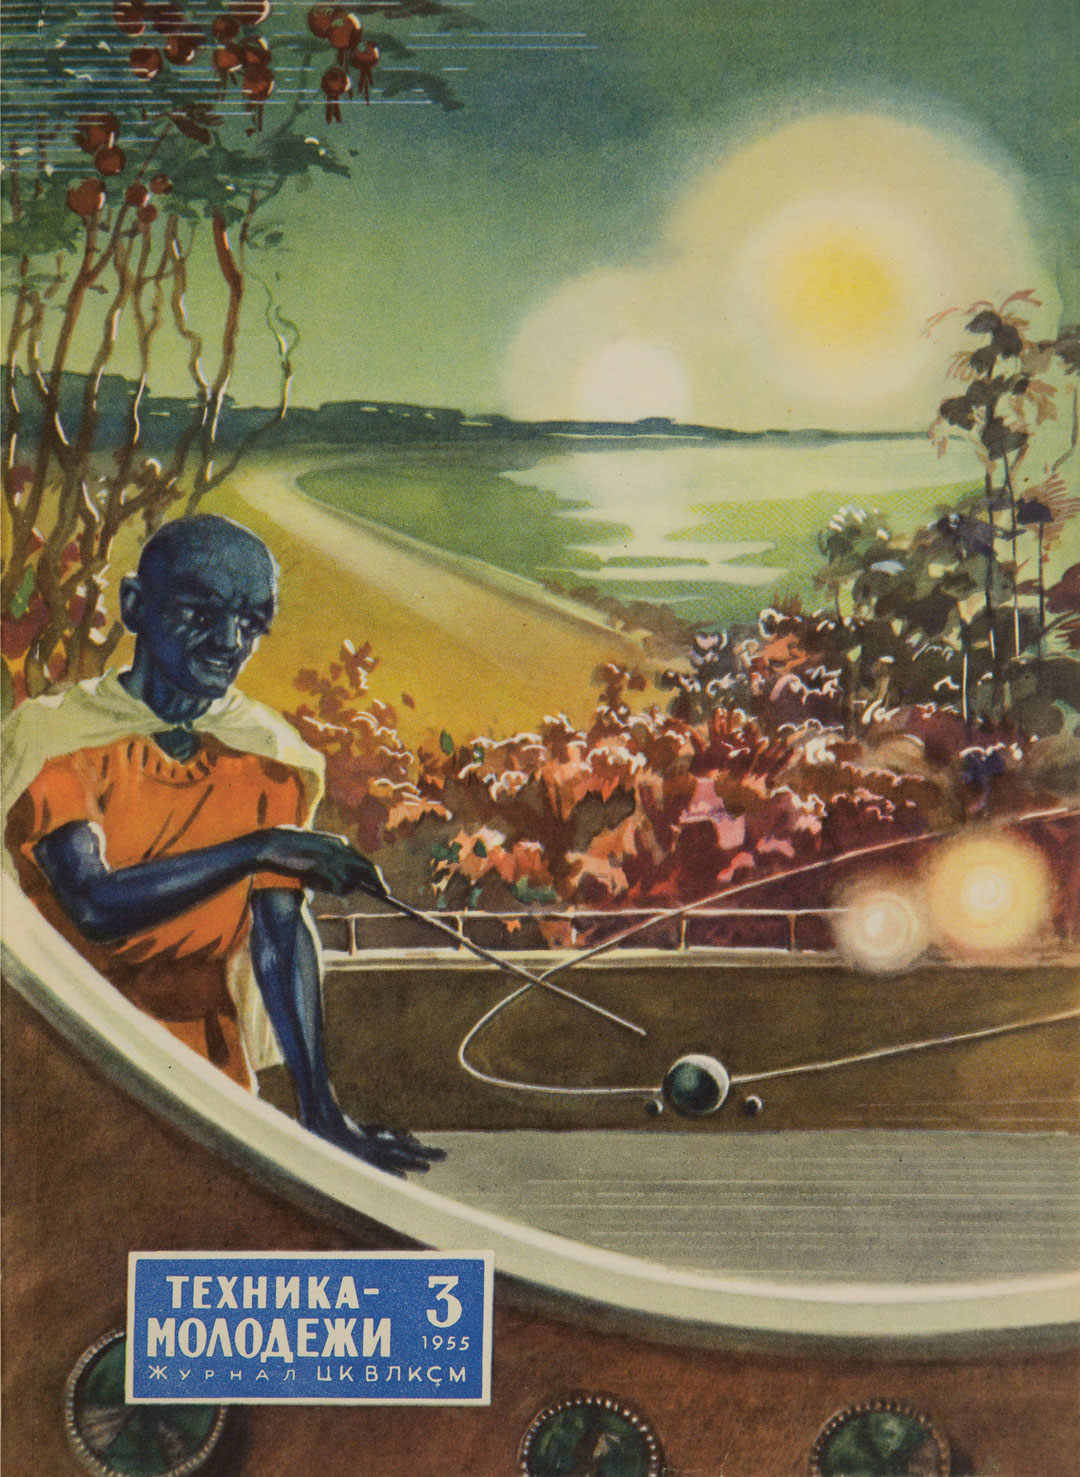 Technology for the Youth, issue 3, 1955, illustration by N. Kolchitsky